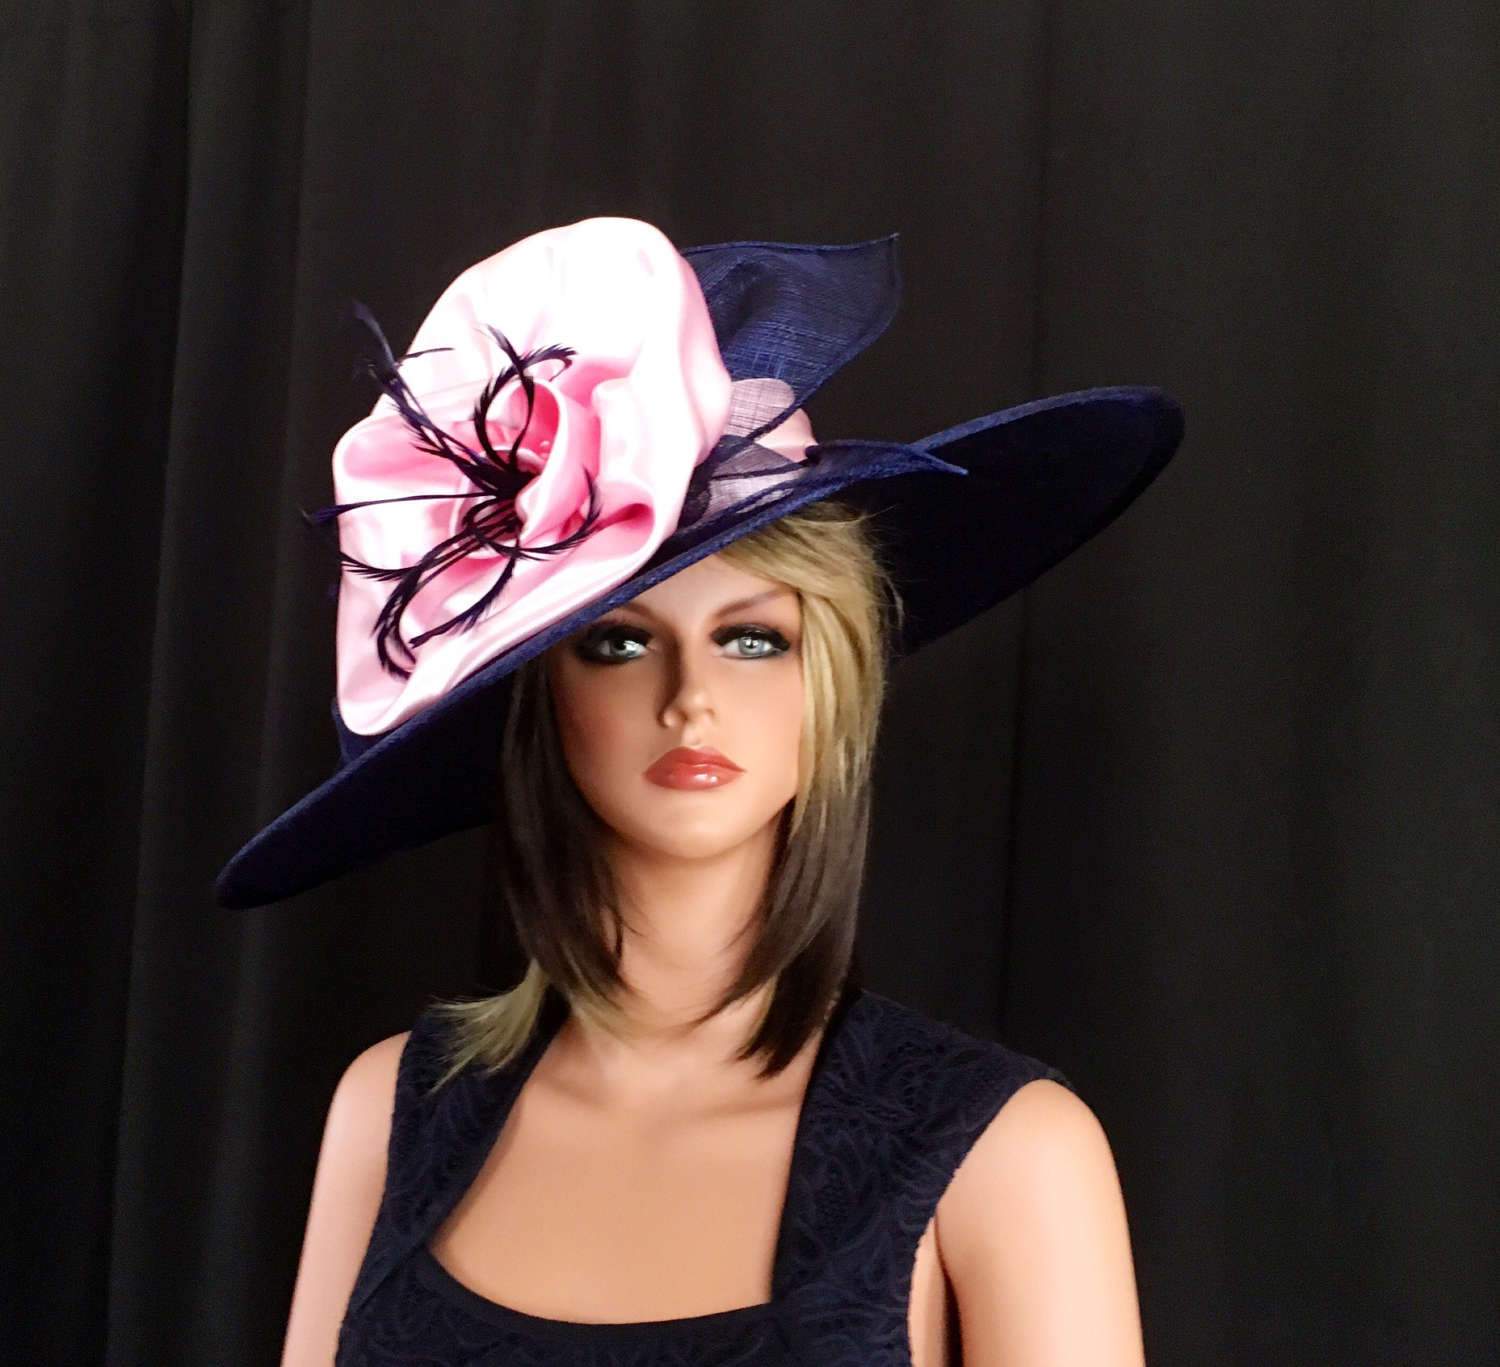 Kentucky Derby hat. Royal Ascot .Formal hat. Navy blue and pink hat for Del Mar races, wedding or other occasions. Couture hat, designer hat